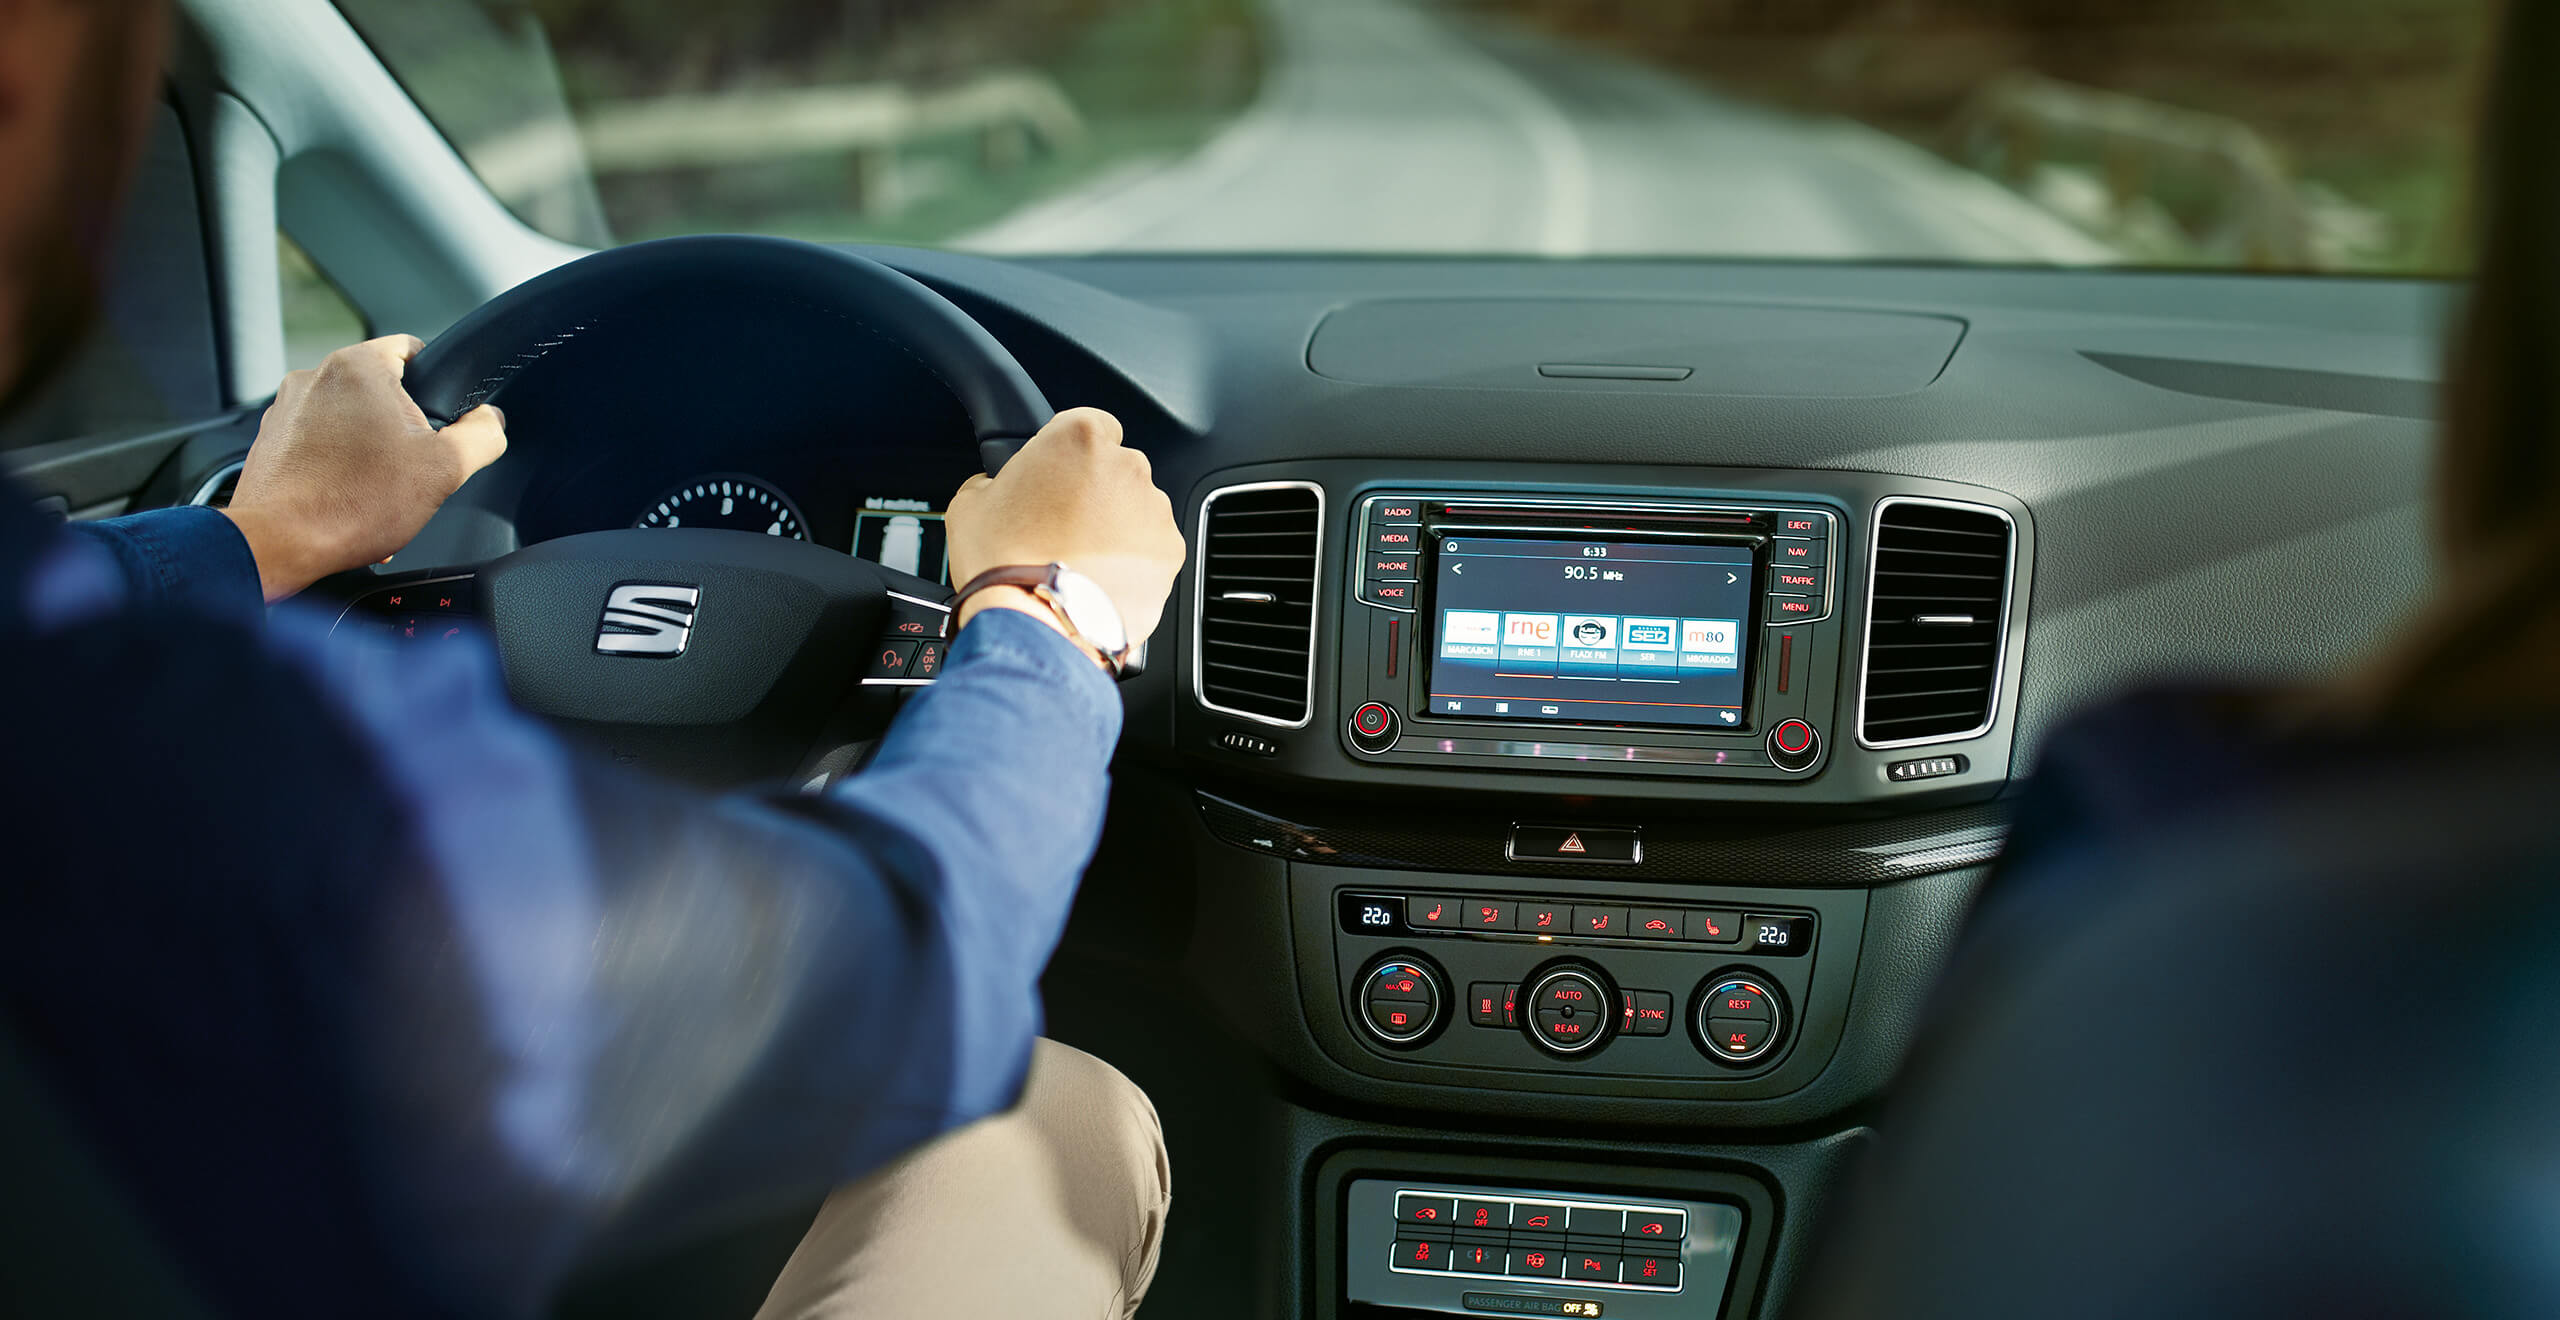 SEAT Alhambra sound system Plus  full colour display with rear camera view and parking sensor visualisation. It also works with your MP3 player and includes a CD Player.